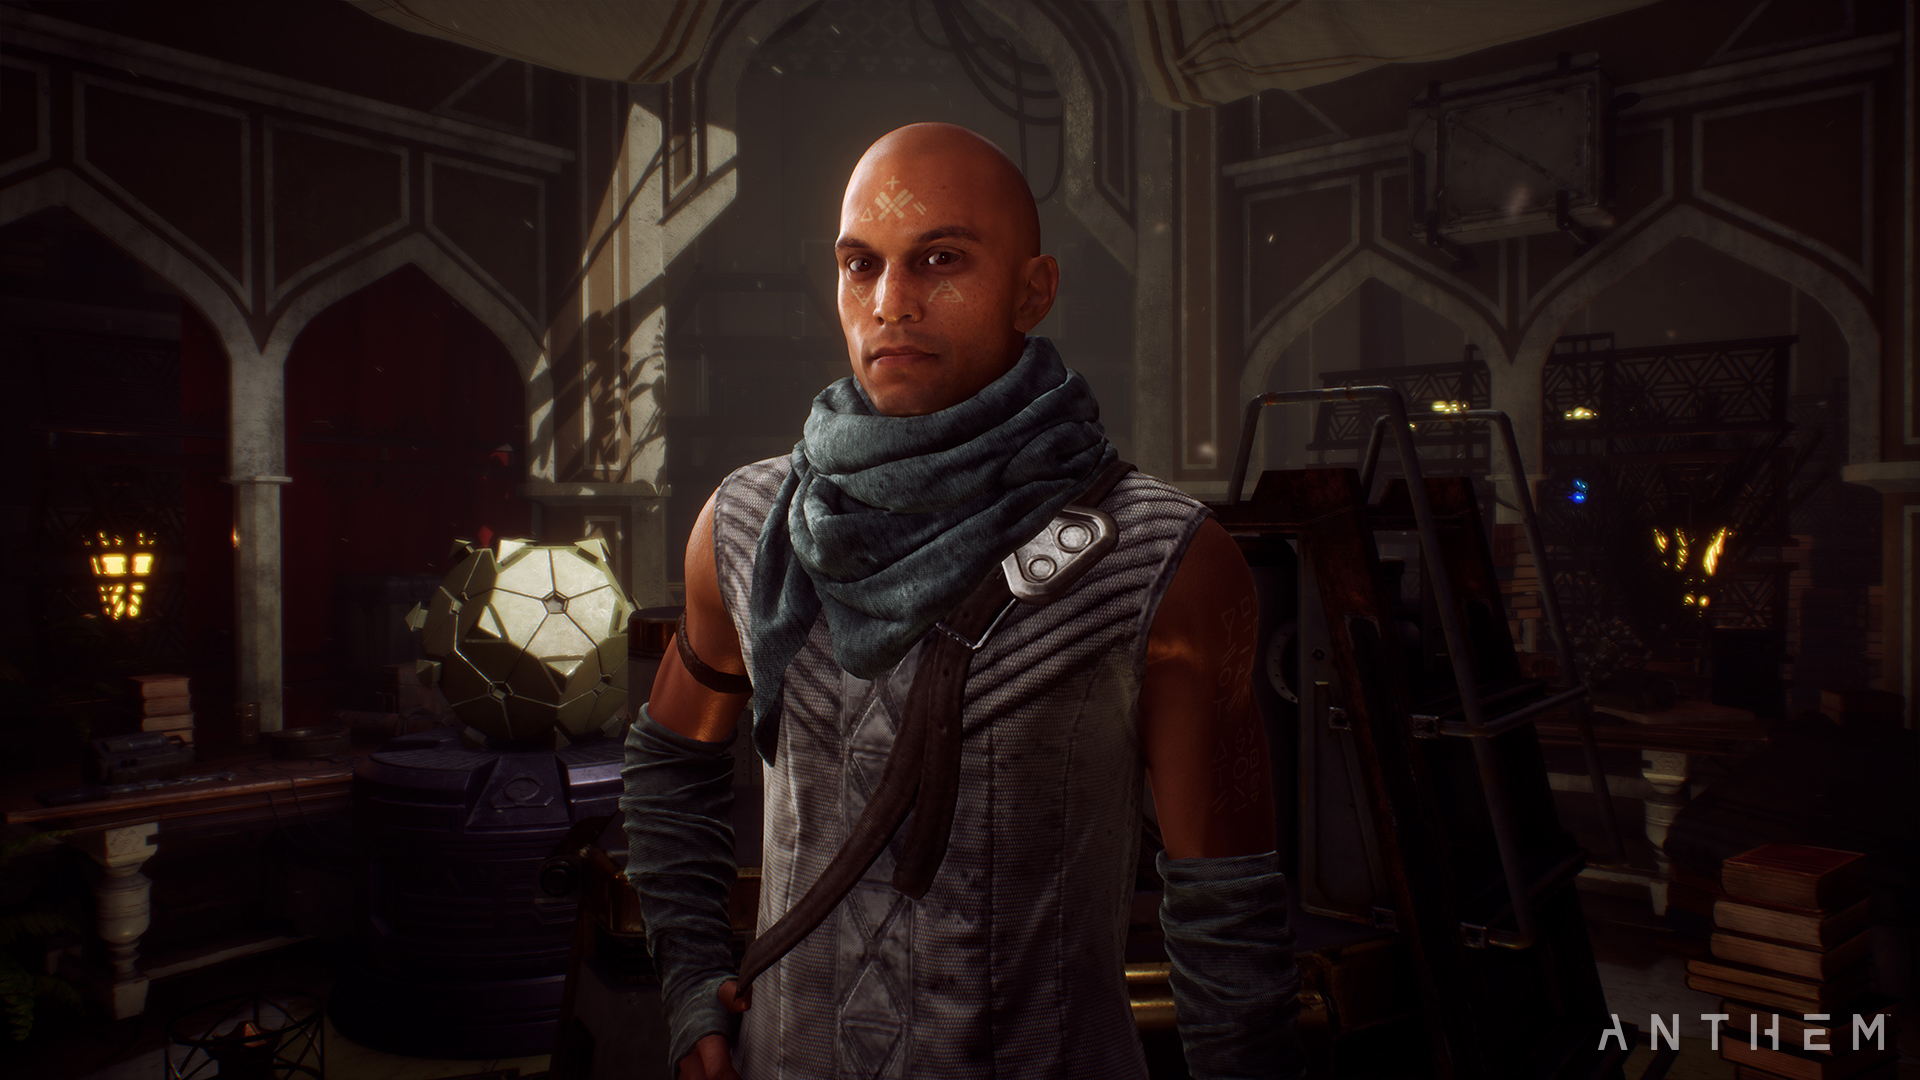 Your dialogue choices won’t lock you out of Anthem missions | PCGamesN